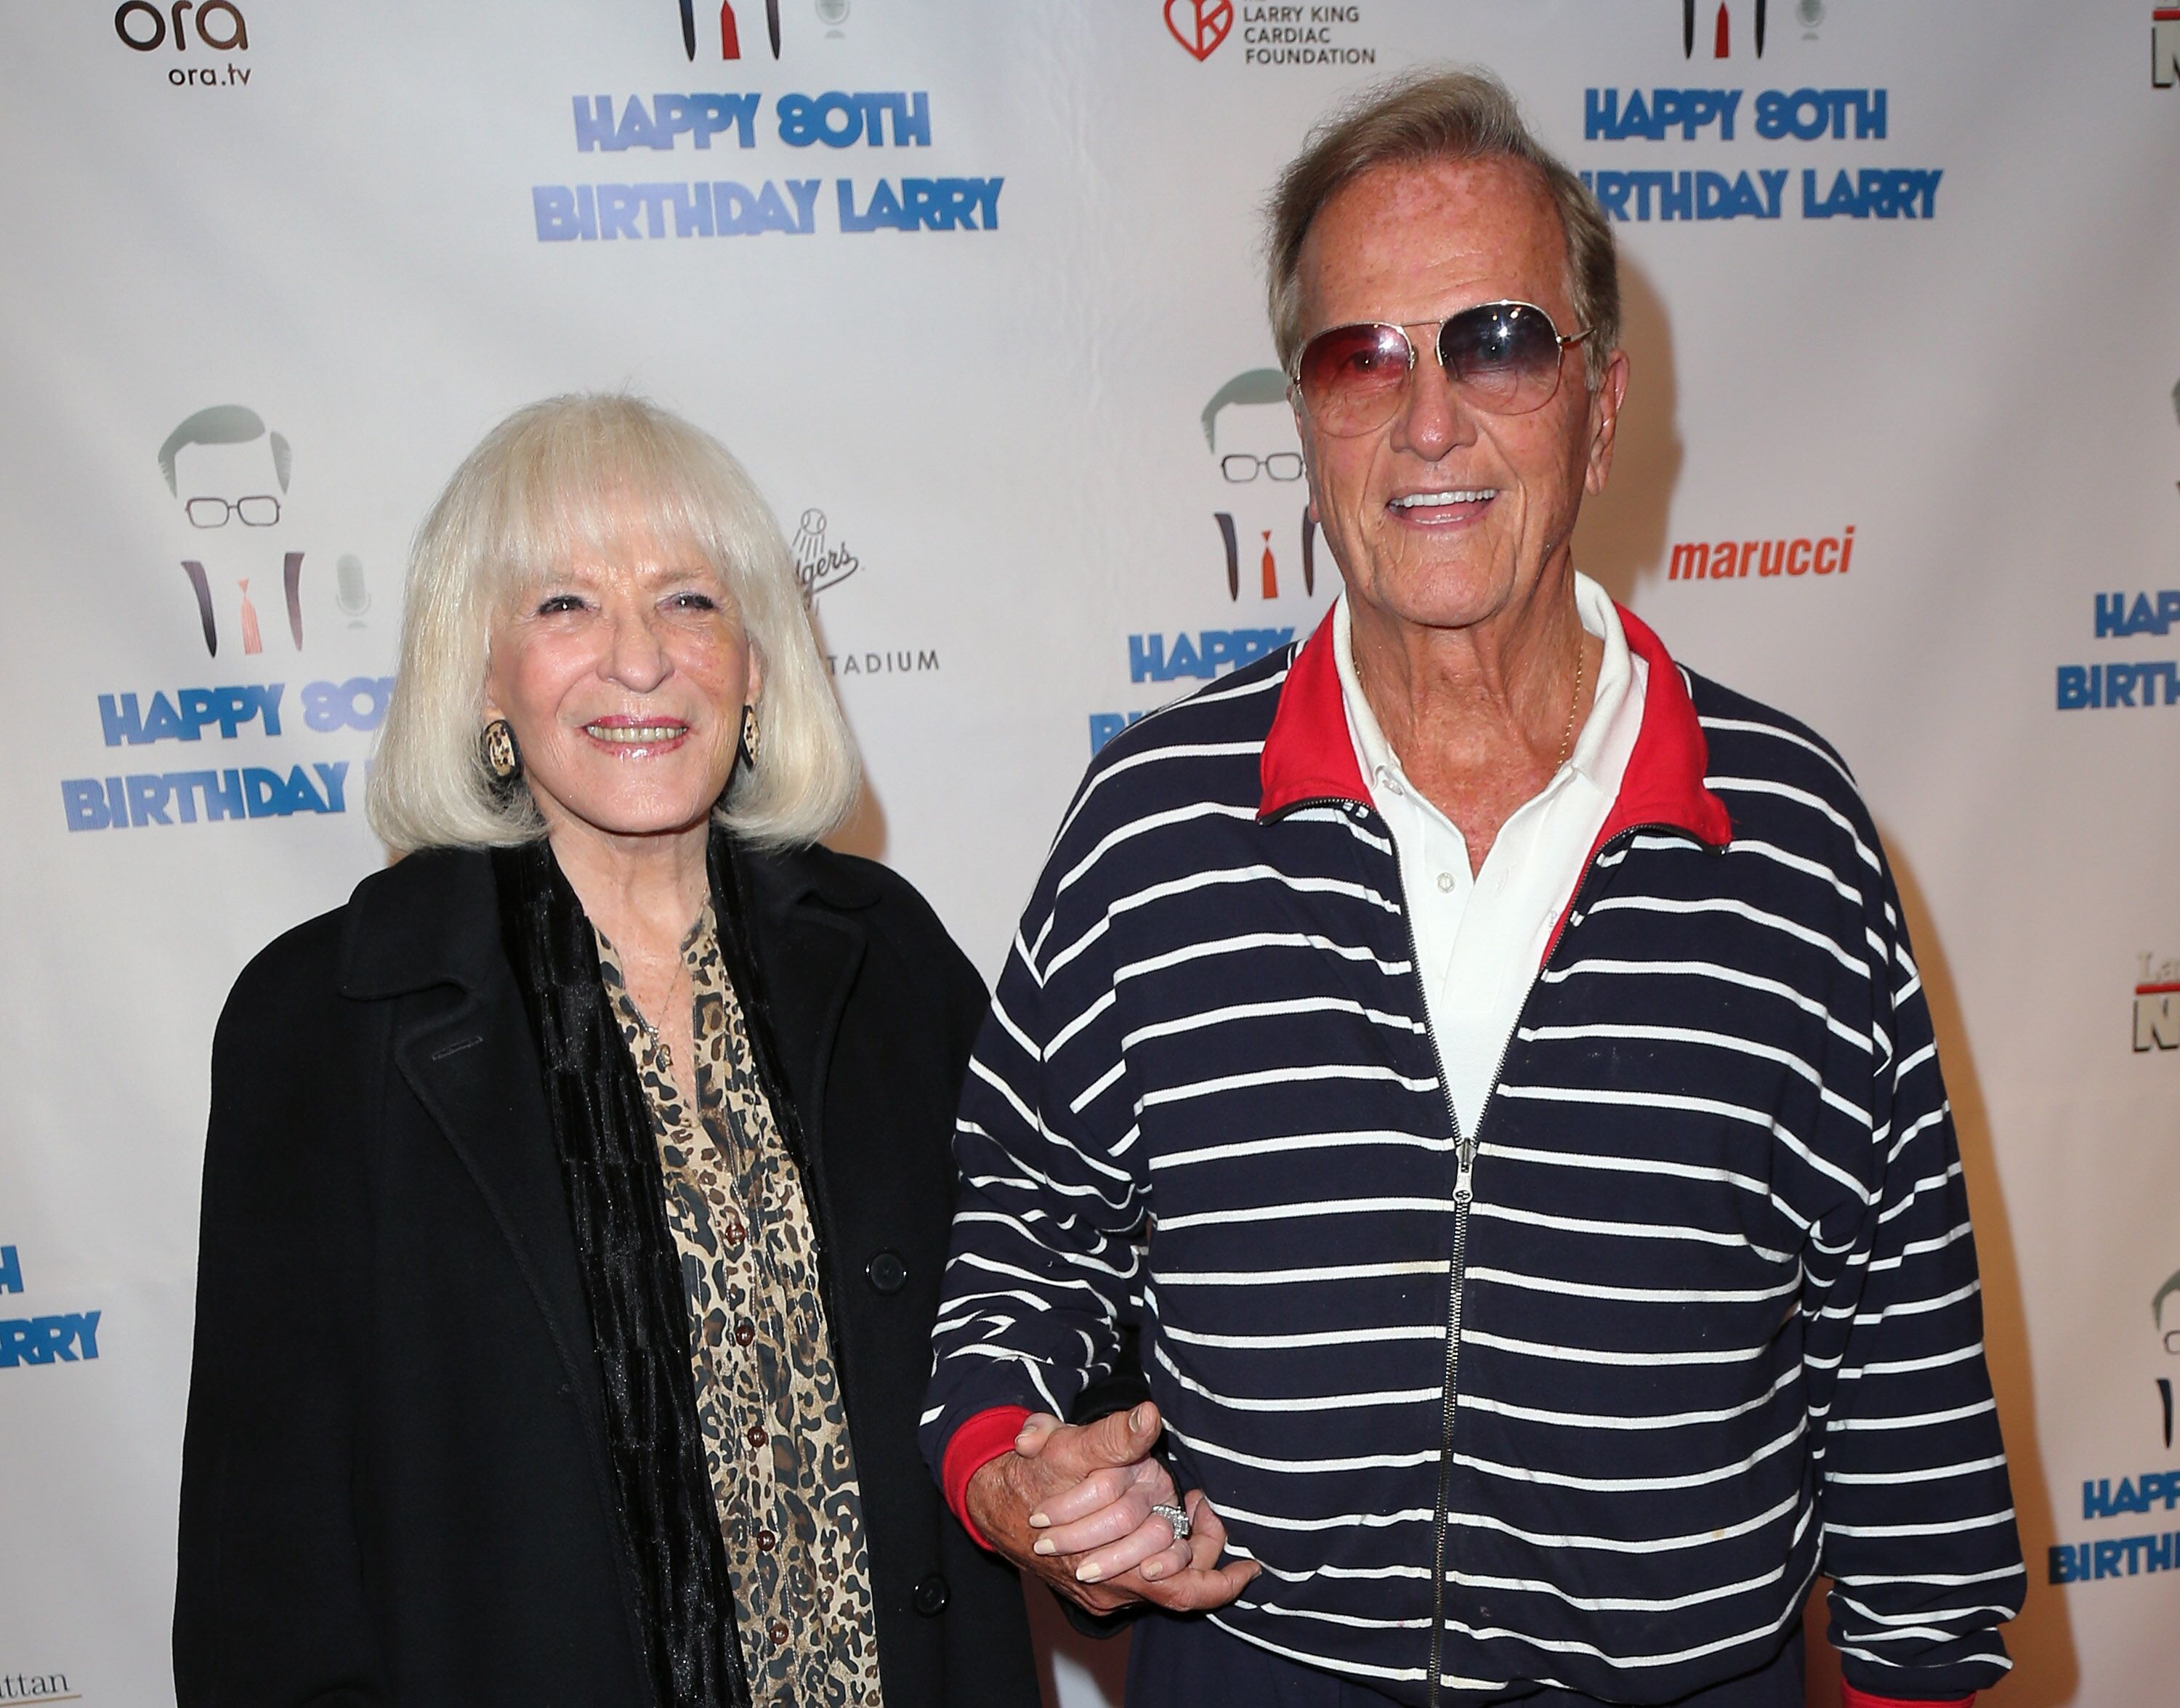 Pat Boone and wife Shirley Boone at Larry King's 80th birthday surprise party in Los Angeles in 2013 | Source: Getty Images